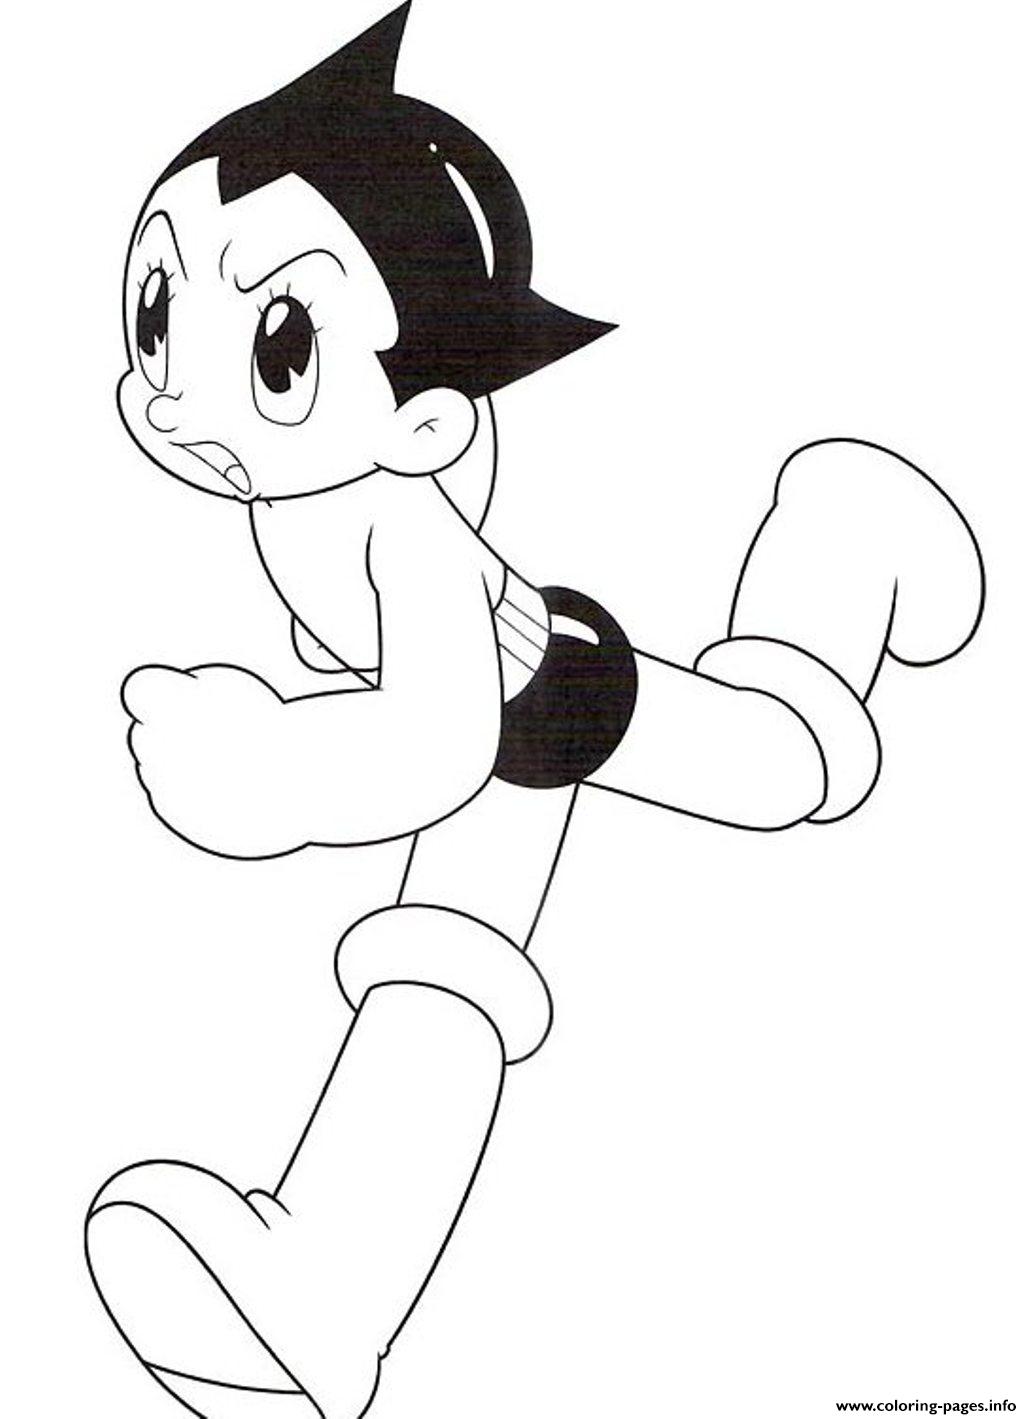 Astro Boy Cartoon S For Kids7db5 coloring